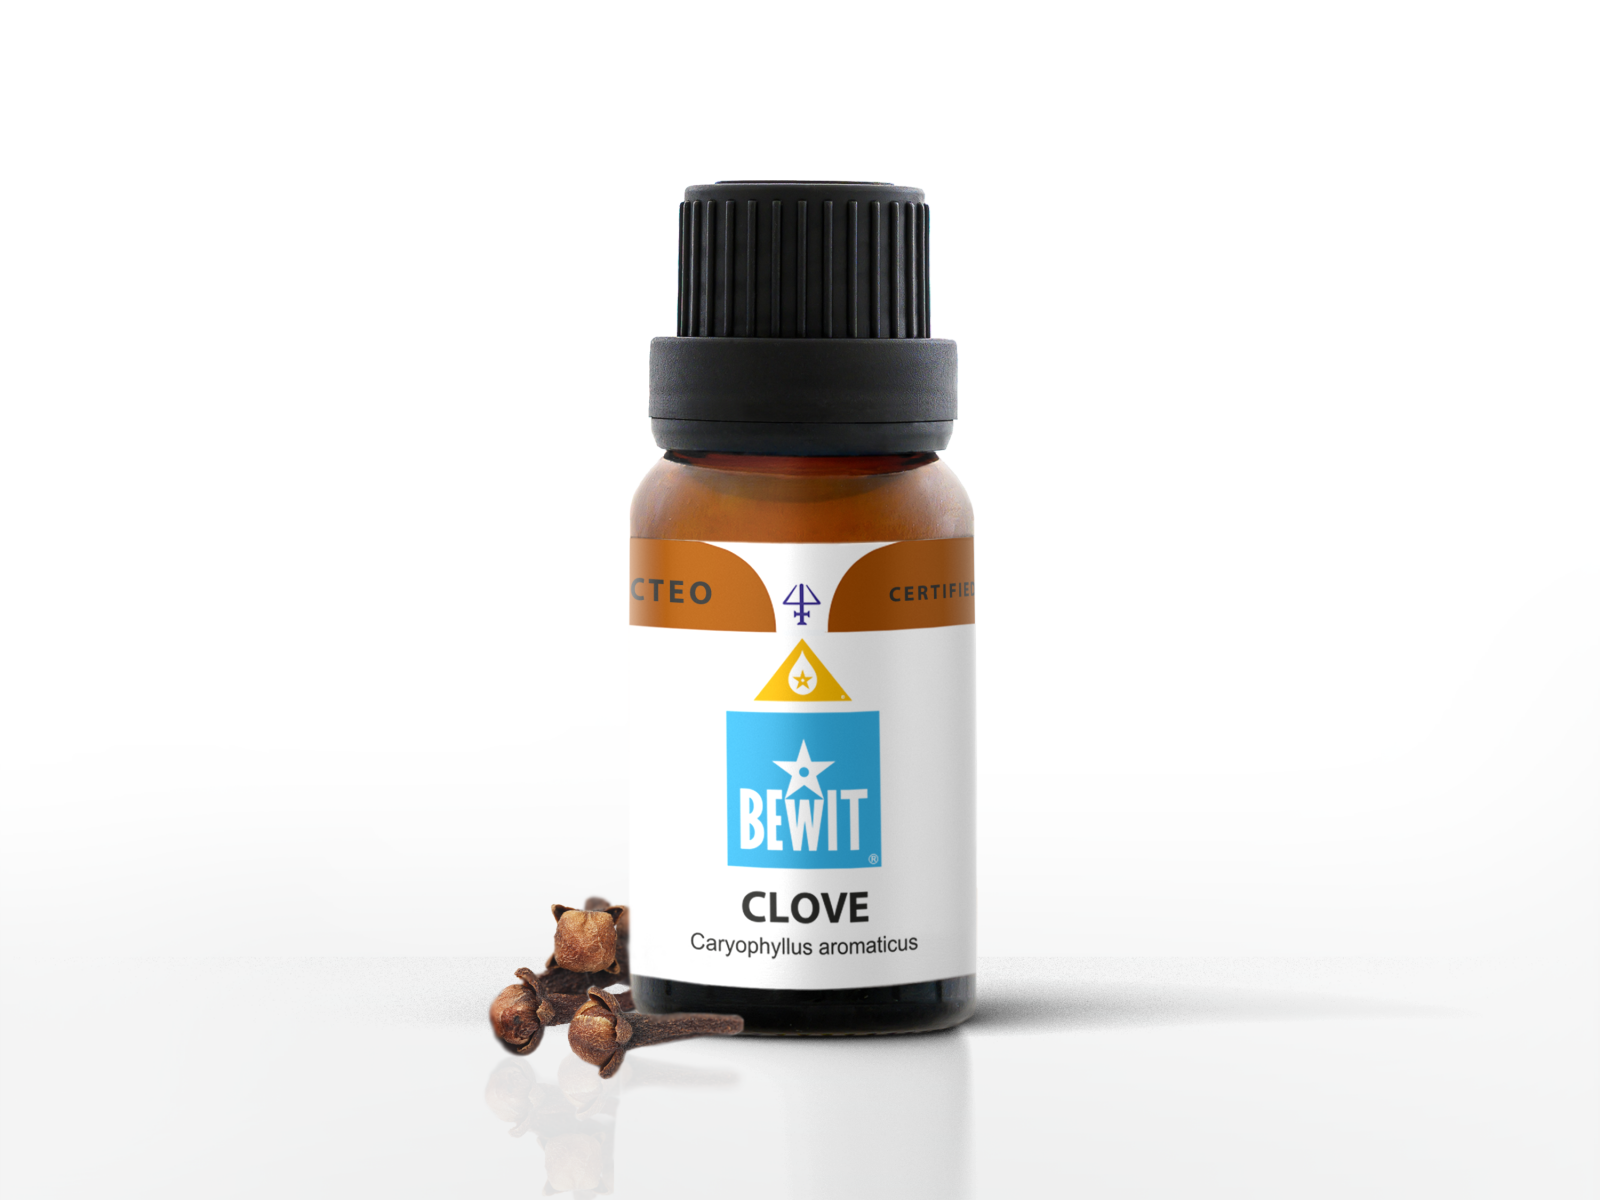 Clove - It is a 100% pure essential oil - 1